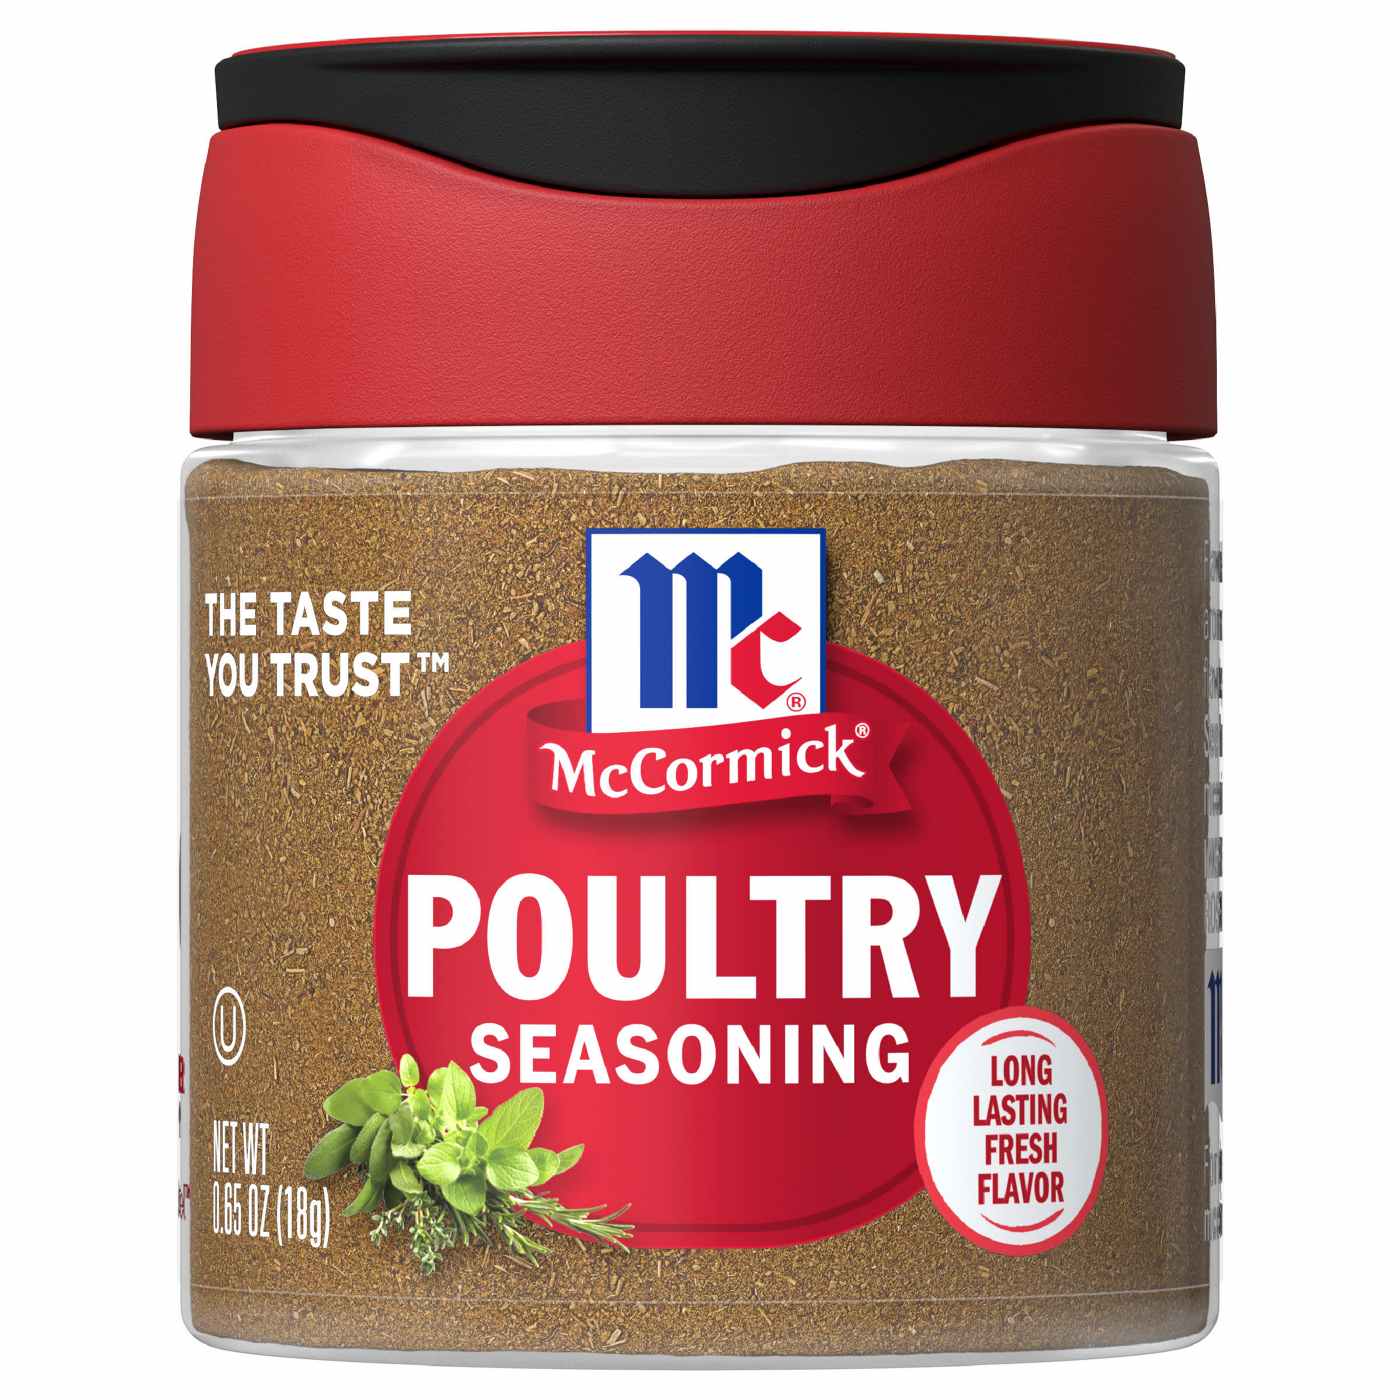 McCormick Poultry Seasoning; image 1 of 8